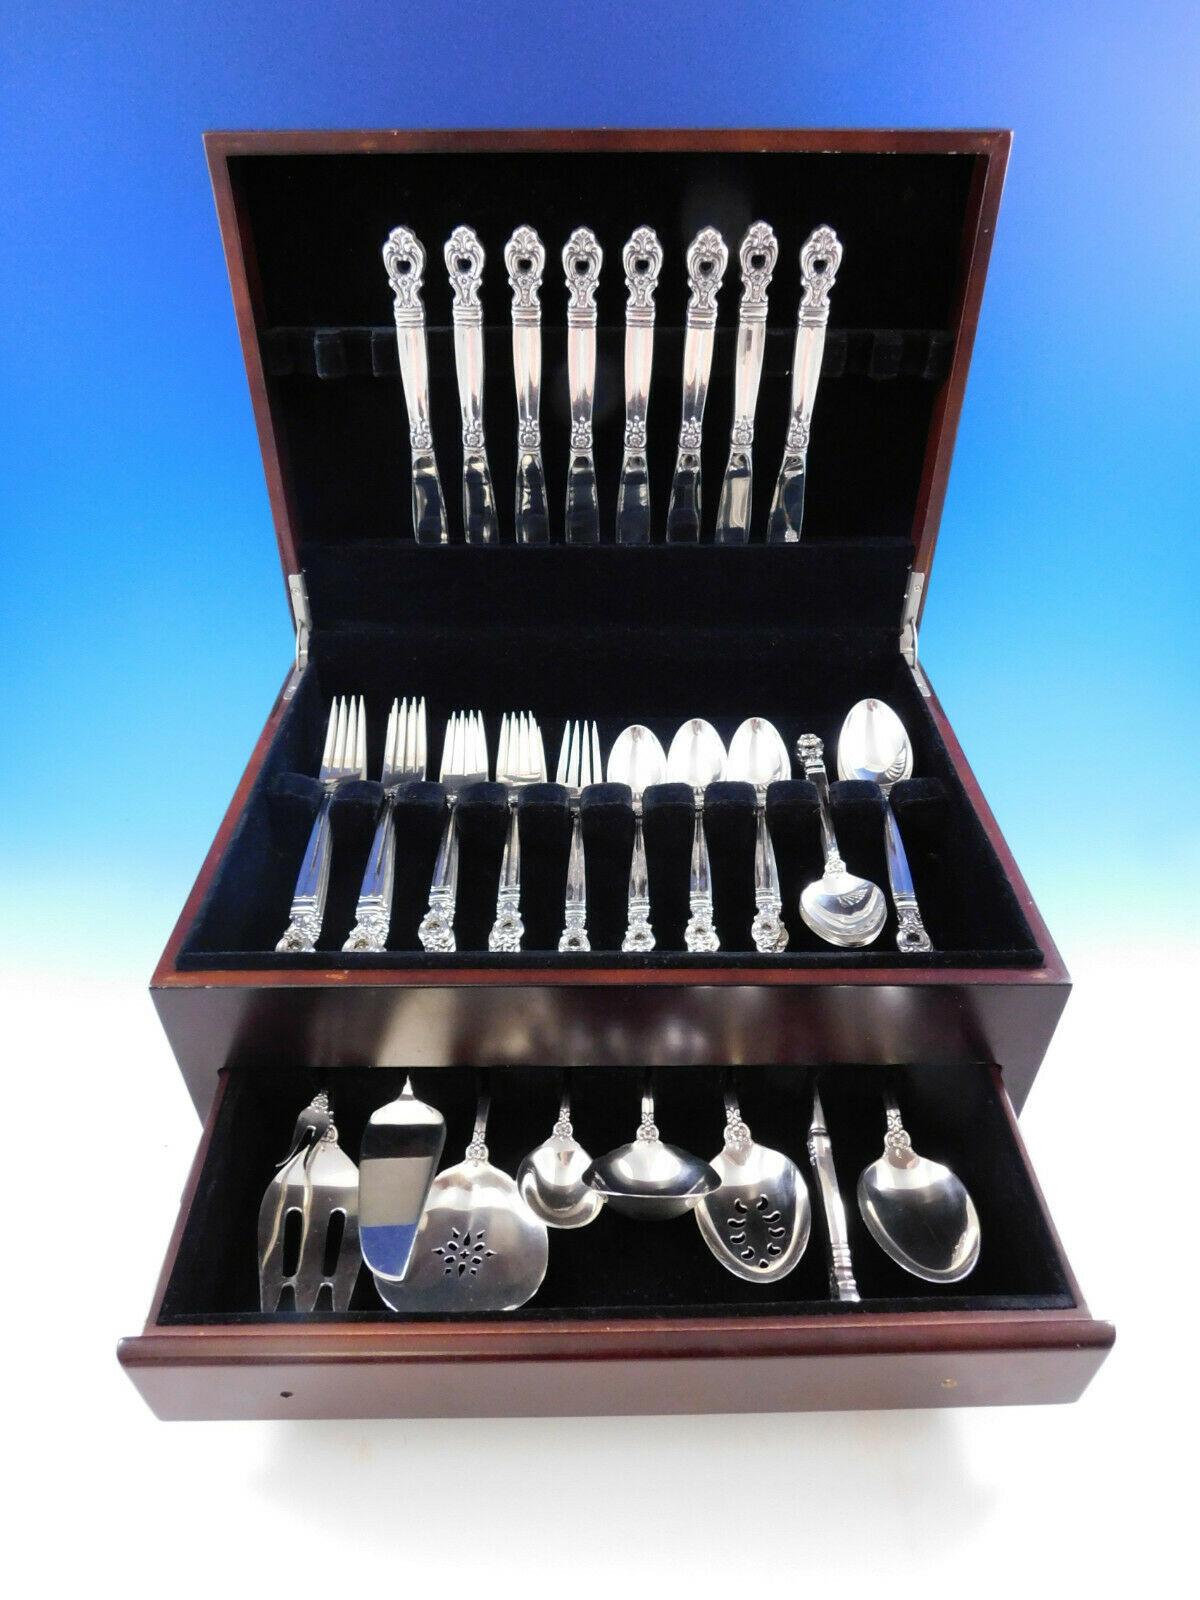 Exquisite Monte Cristo by Towle pierced handle, circa 1971, sterling silver flatware set, 49 pieces. This set includes:

8 knives, 9